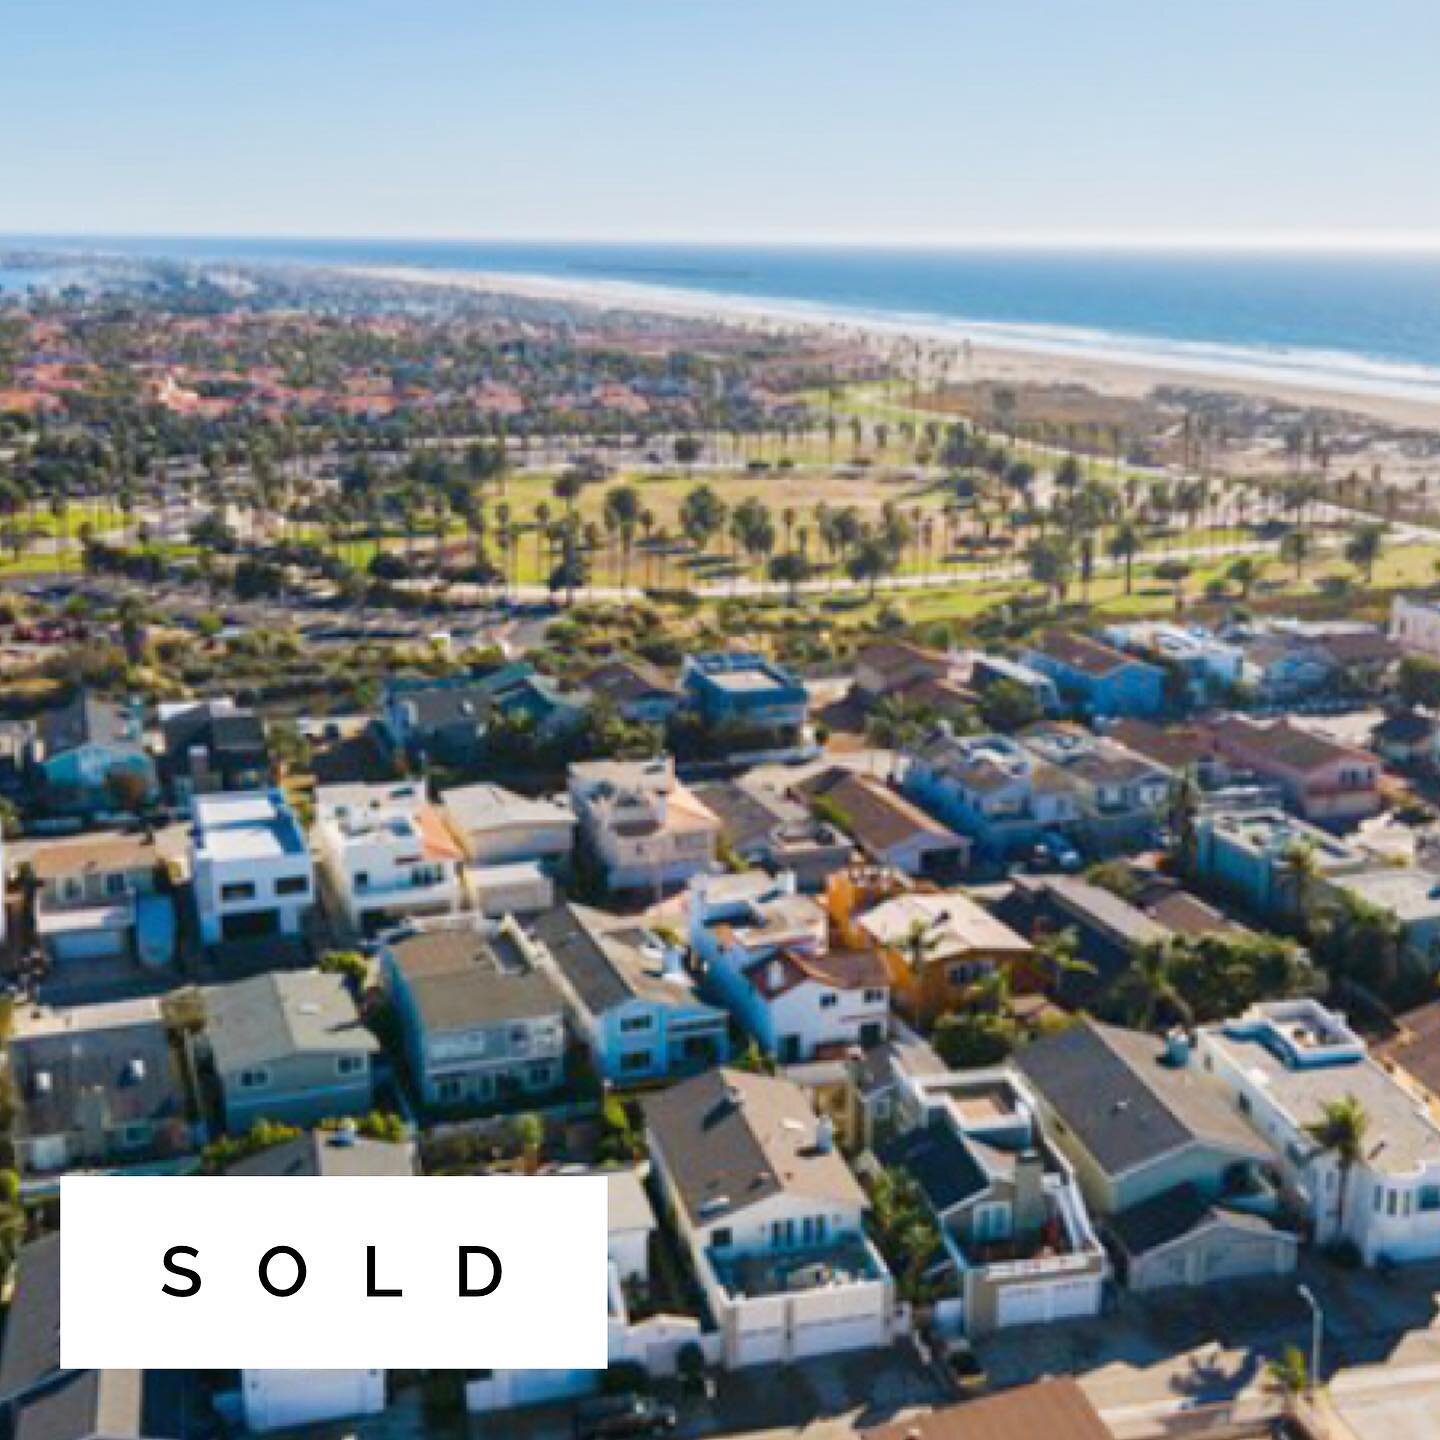 S O L D !
Beach house steps from the sand just sold in serene and gorgeous Mandalay Shores... @marcusbeck.malibu and I thank @suarezbenz for bringing the perfect buyer. #beachhouse #dreamhouse #foreverhome #shanoahcurranhomes #livsothebysventura